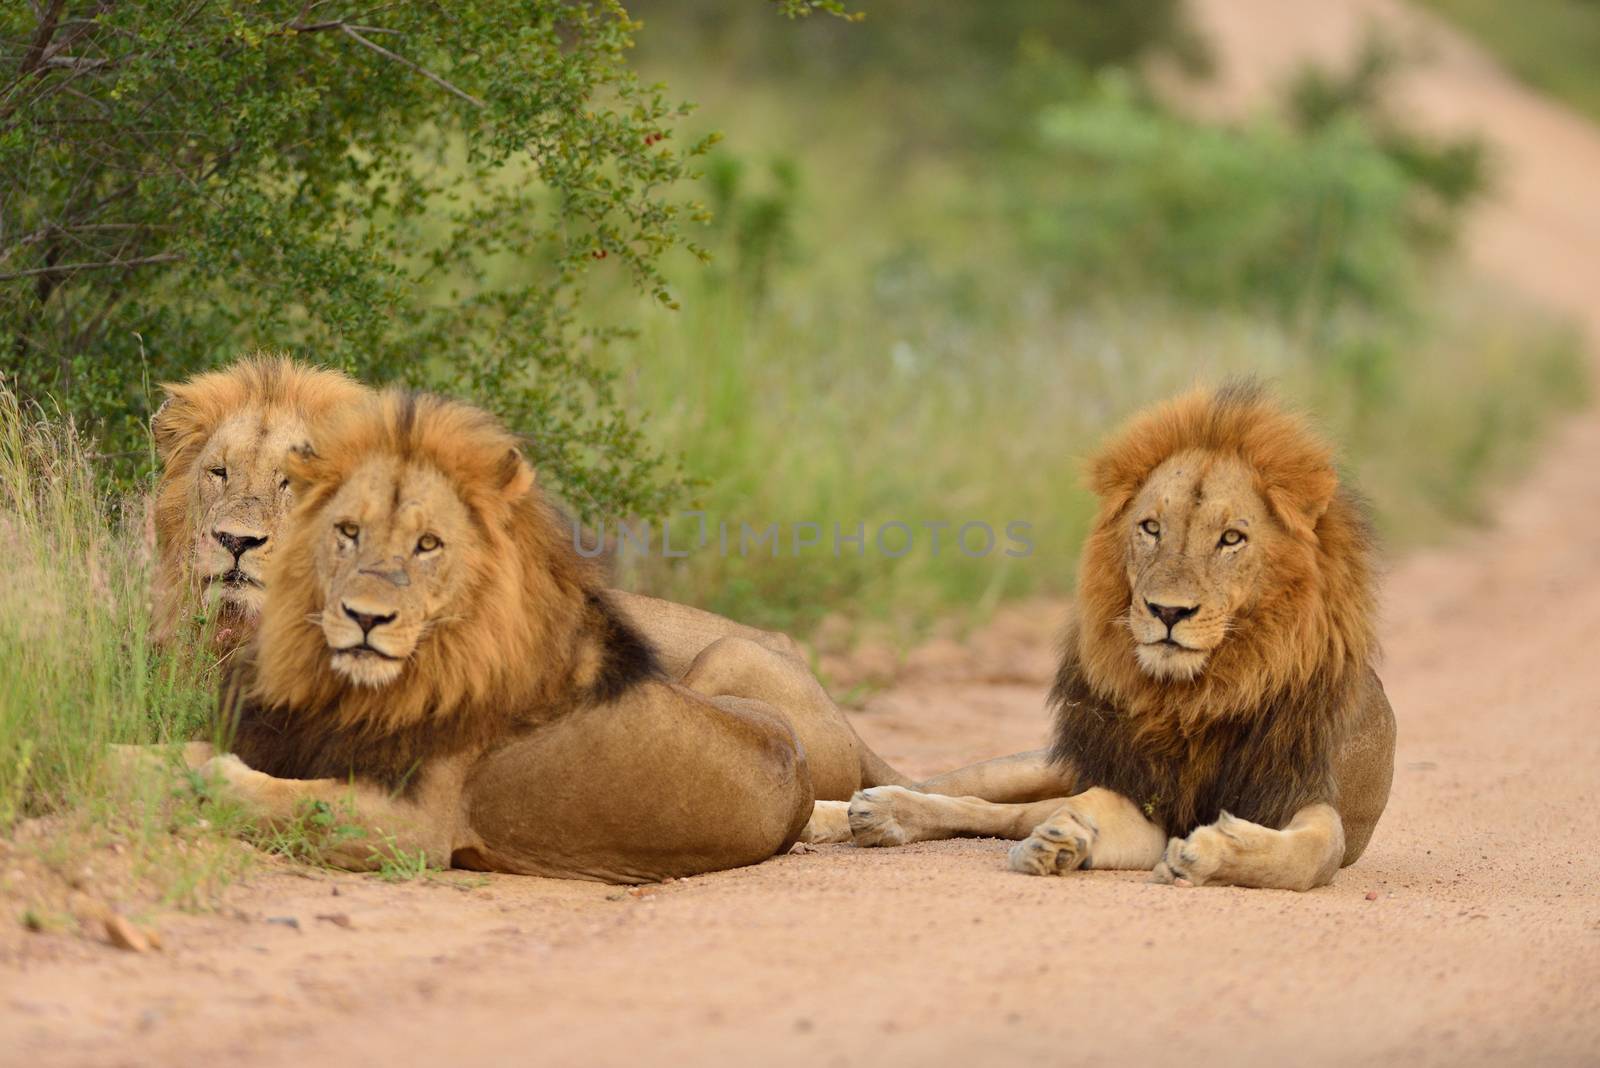 Male lions in the wilderness of Africa by ozkanzozmen